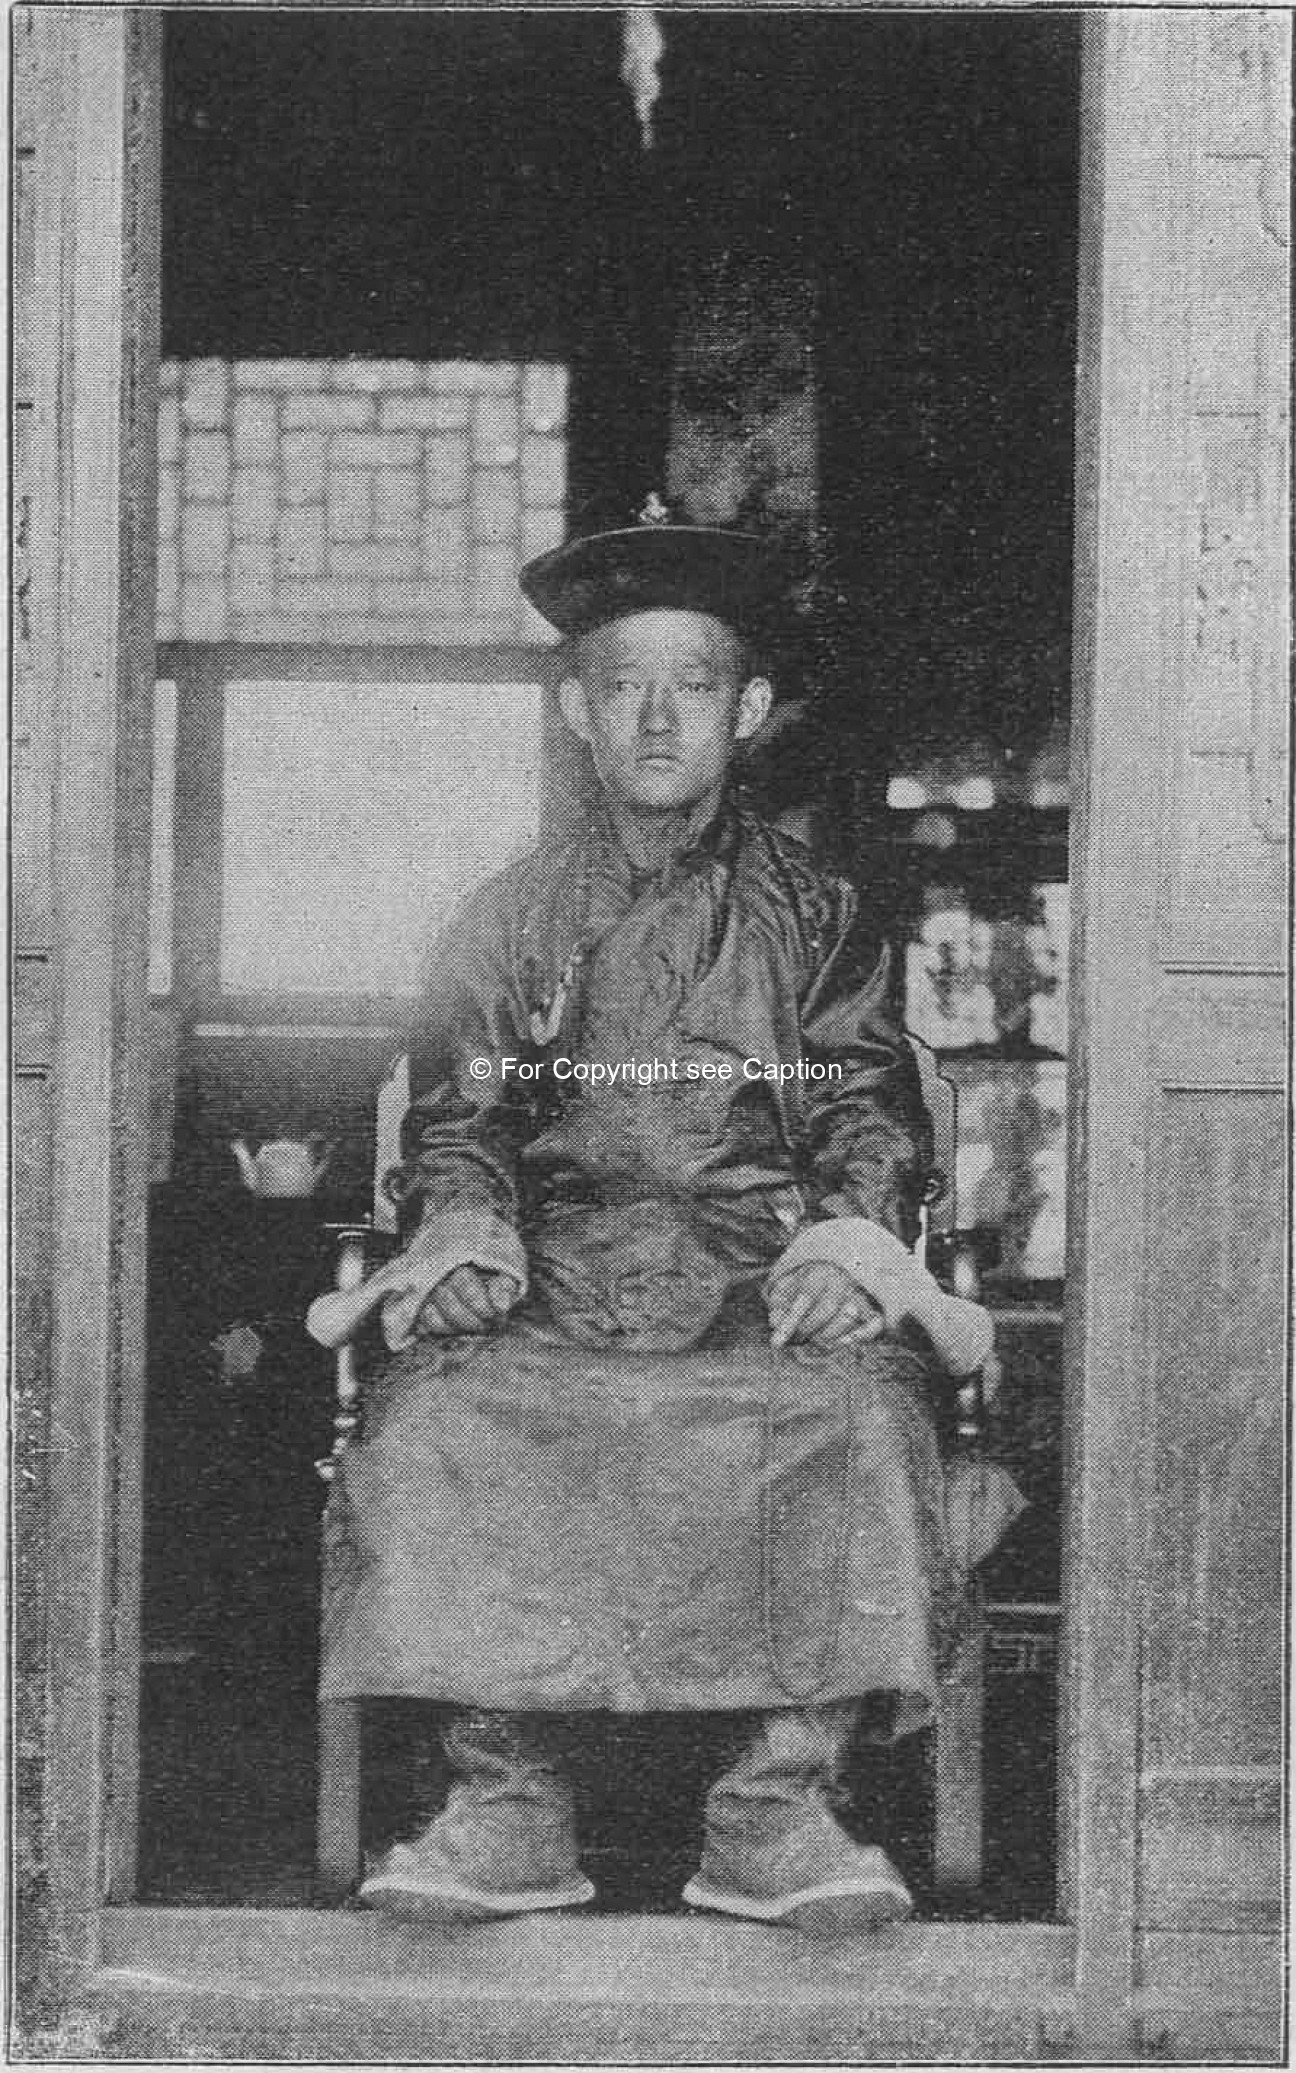 The Bogd khaan or 8th Bogd jevtsündamba khutagt (1870-1924) at about 22 years of age. Pozdneev, A. M